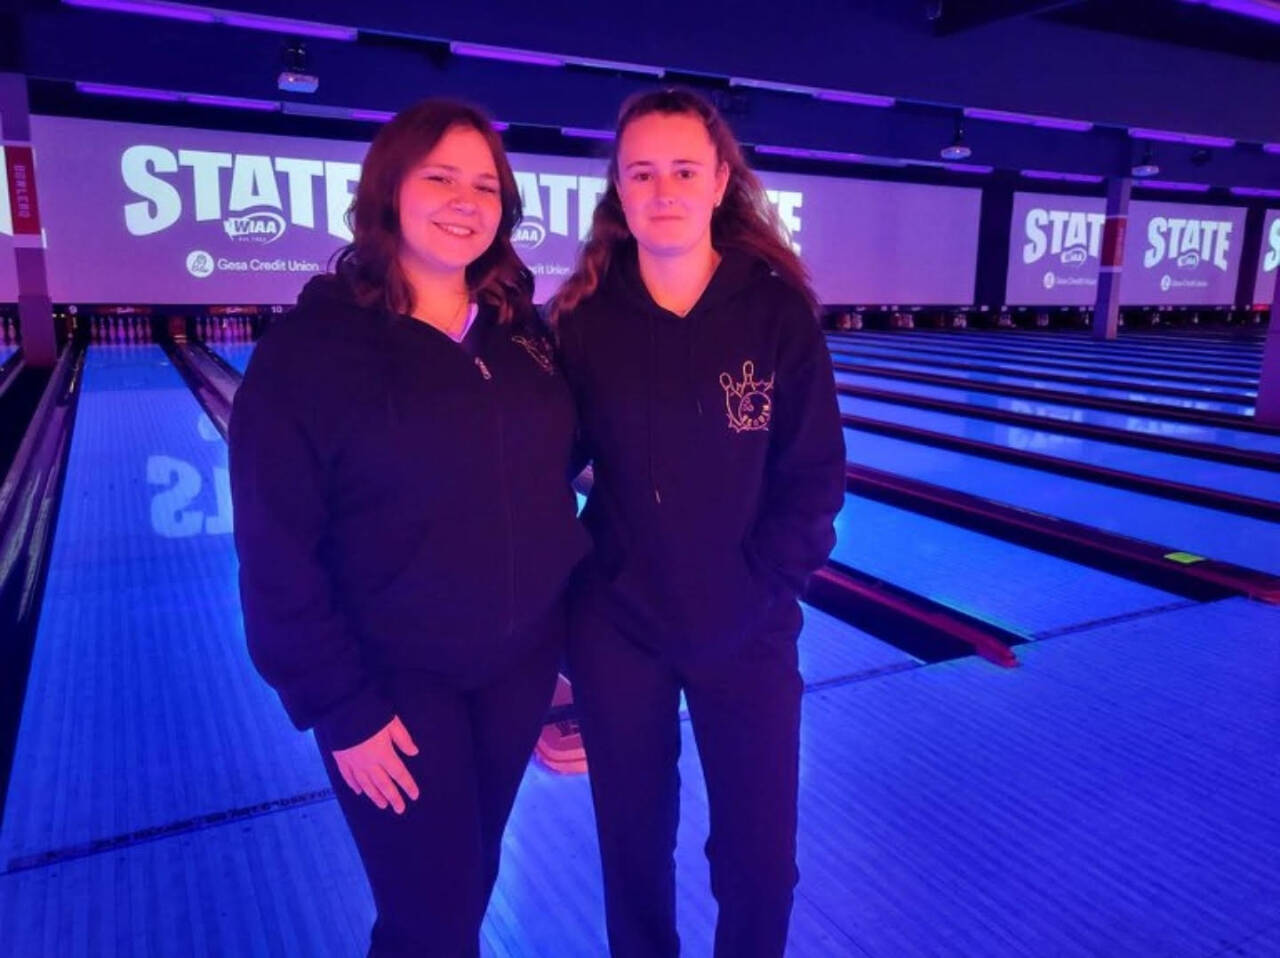 Photo courtesy of Randy Perry
Sequim High’s Morgan Kayser, left, and Nikoline Updike earn a tie (with each other) for 37th at the state 1A/2A bowling finals in Tukwila this past weekend.